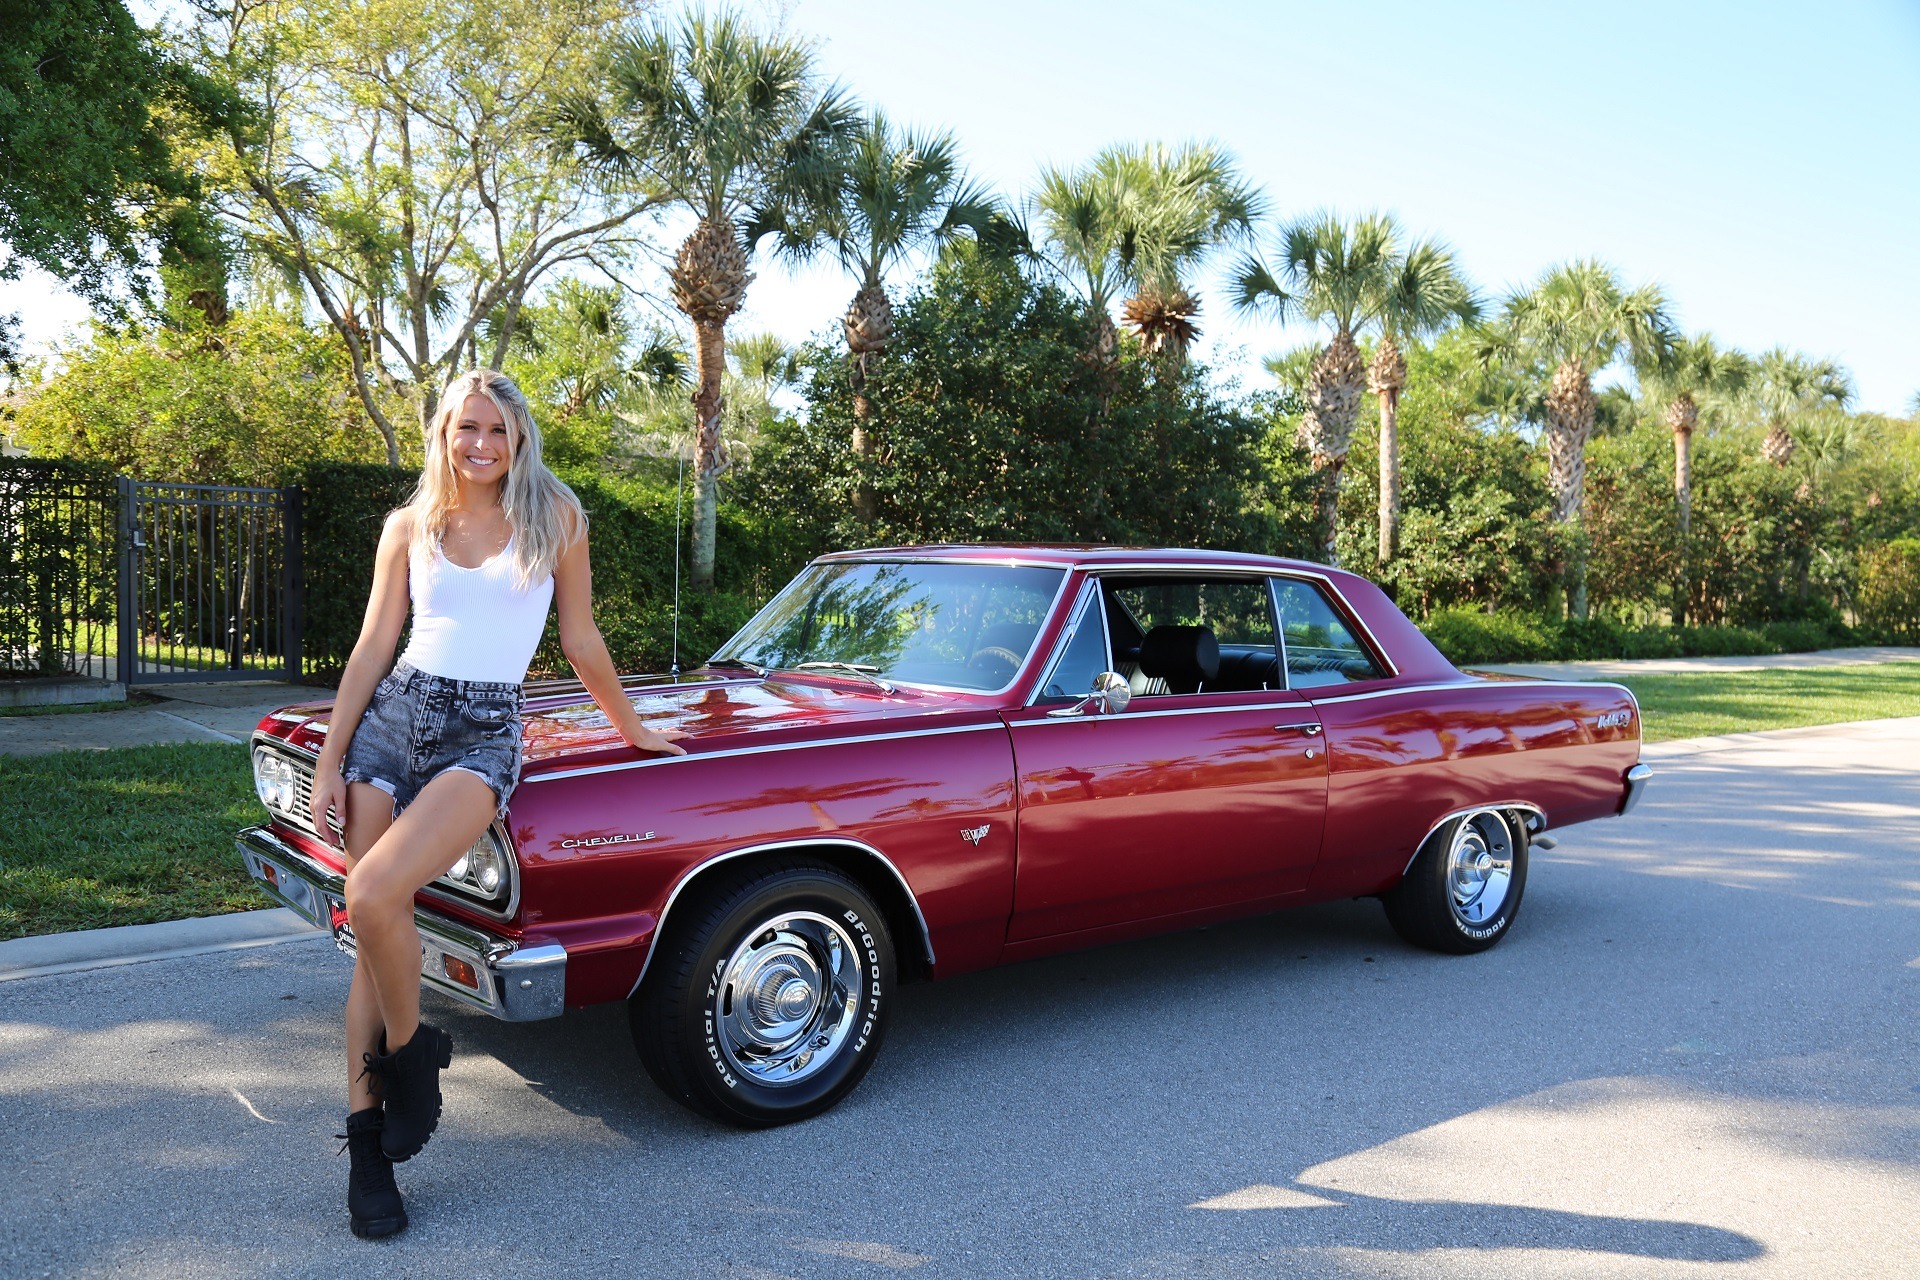 Used 1964 Chevrolet Chevelle SS Chevelle Malibu SS for sale Sold at Muscle Cars for Sale Inc. in Fort Myers FL 33912 1